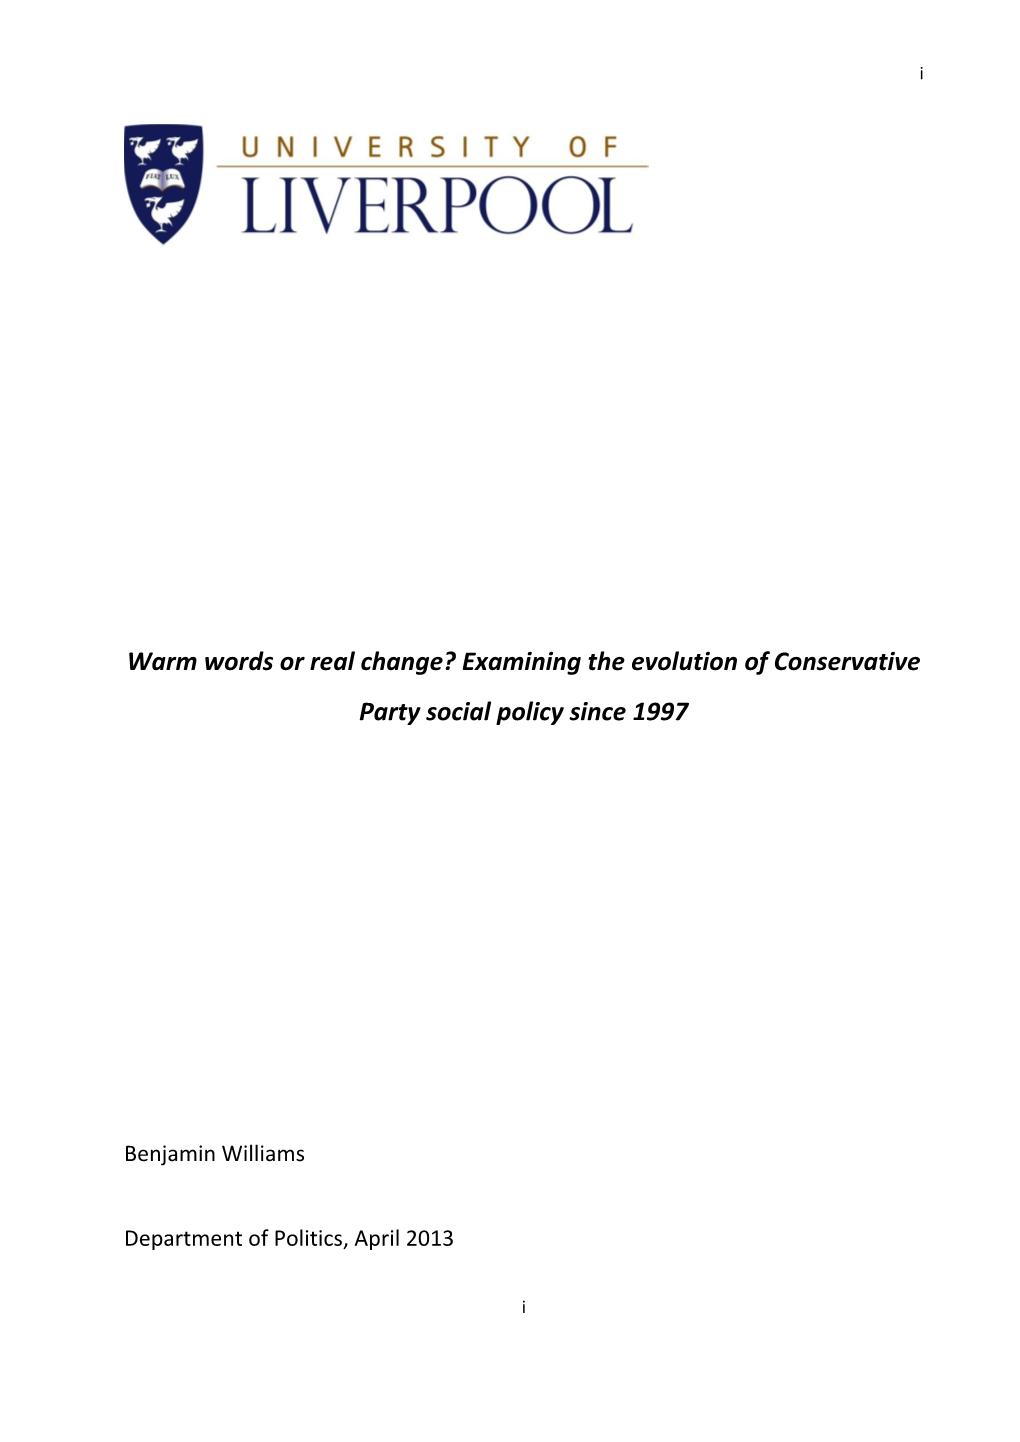 `The Evolution of Conservative Party Social (Particularly Welfare) Policy